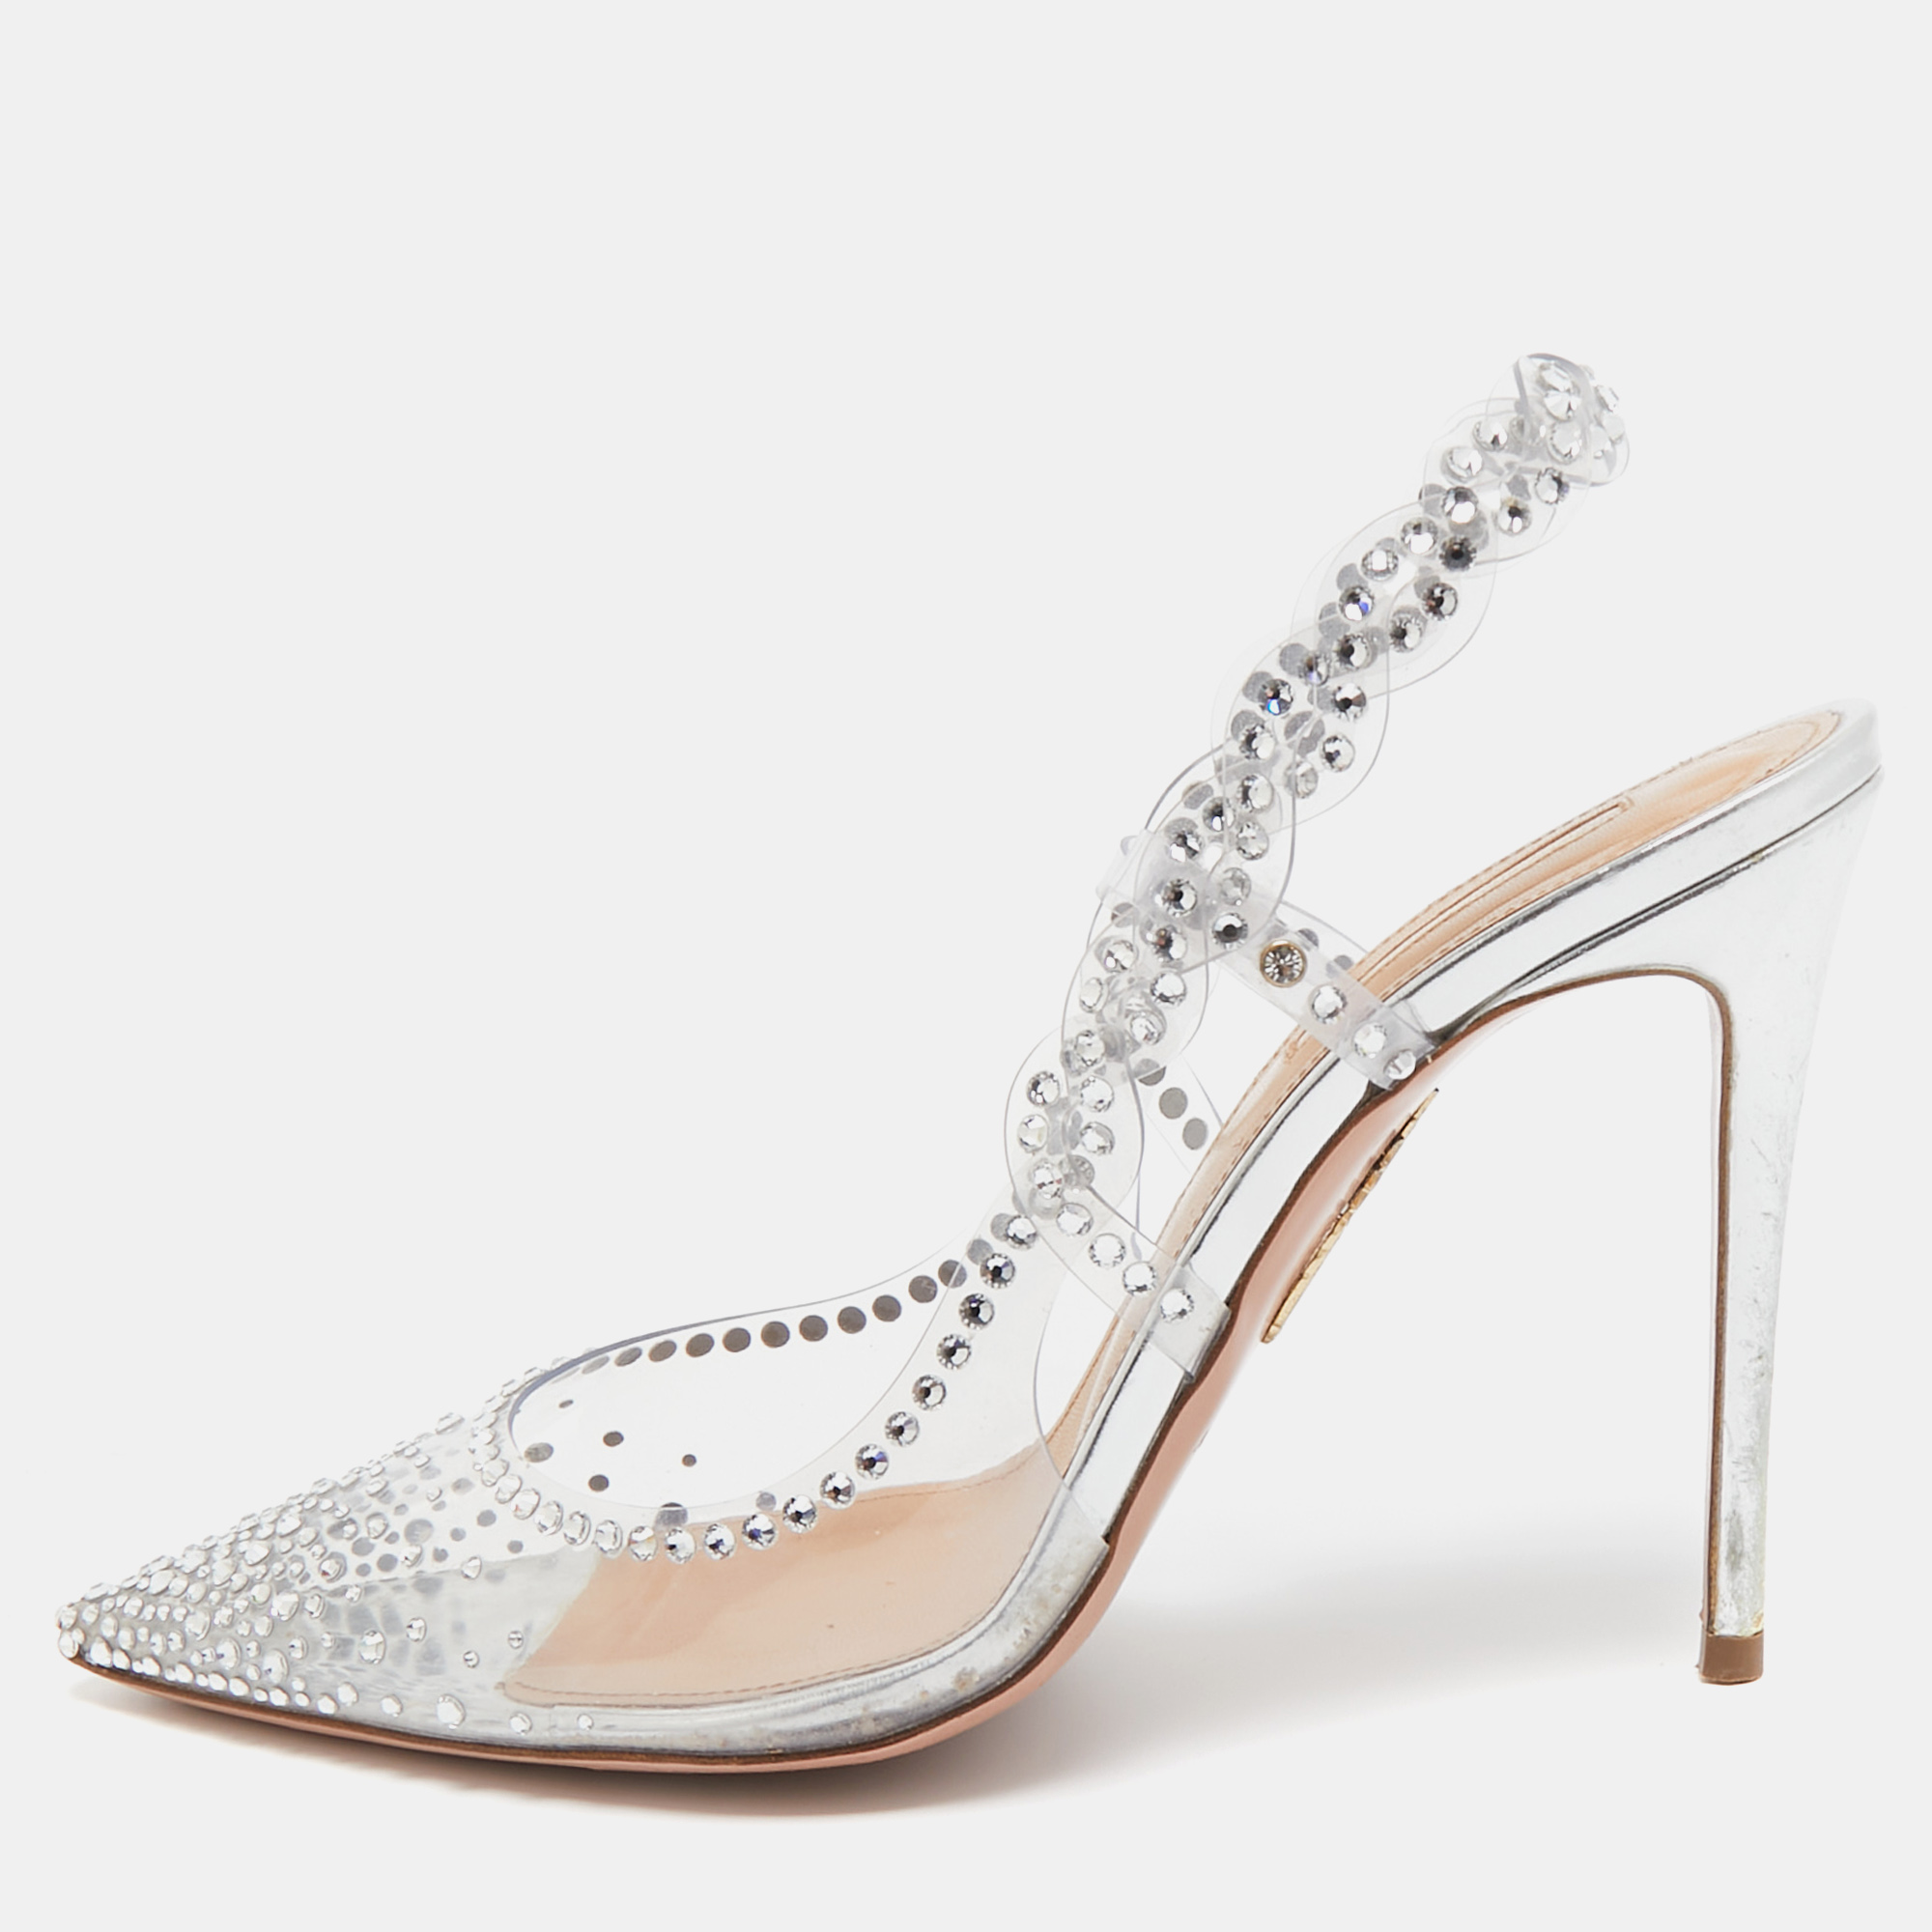 Pre-owned Aquazzura Transparent Pvc And Crystal Embellished Heaven 105 Pump Size 37